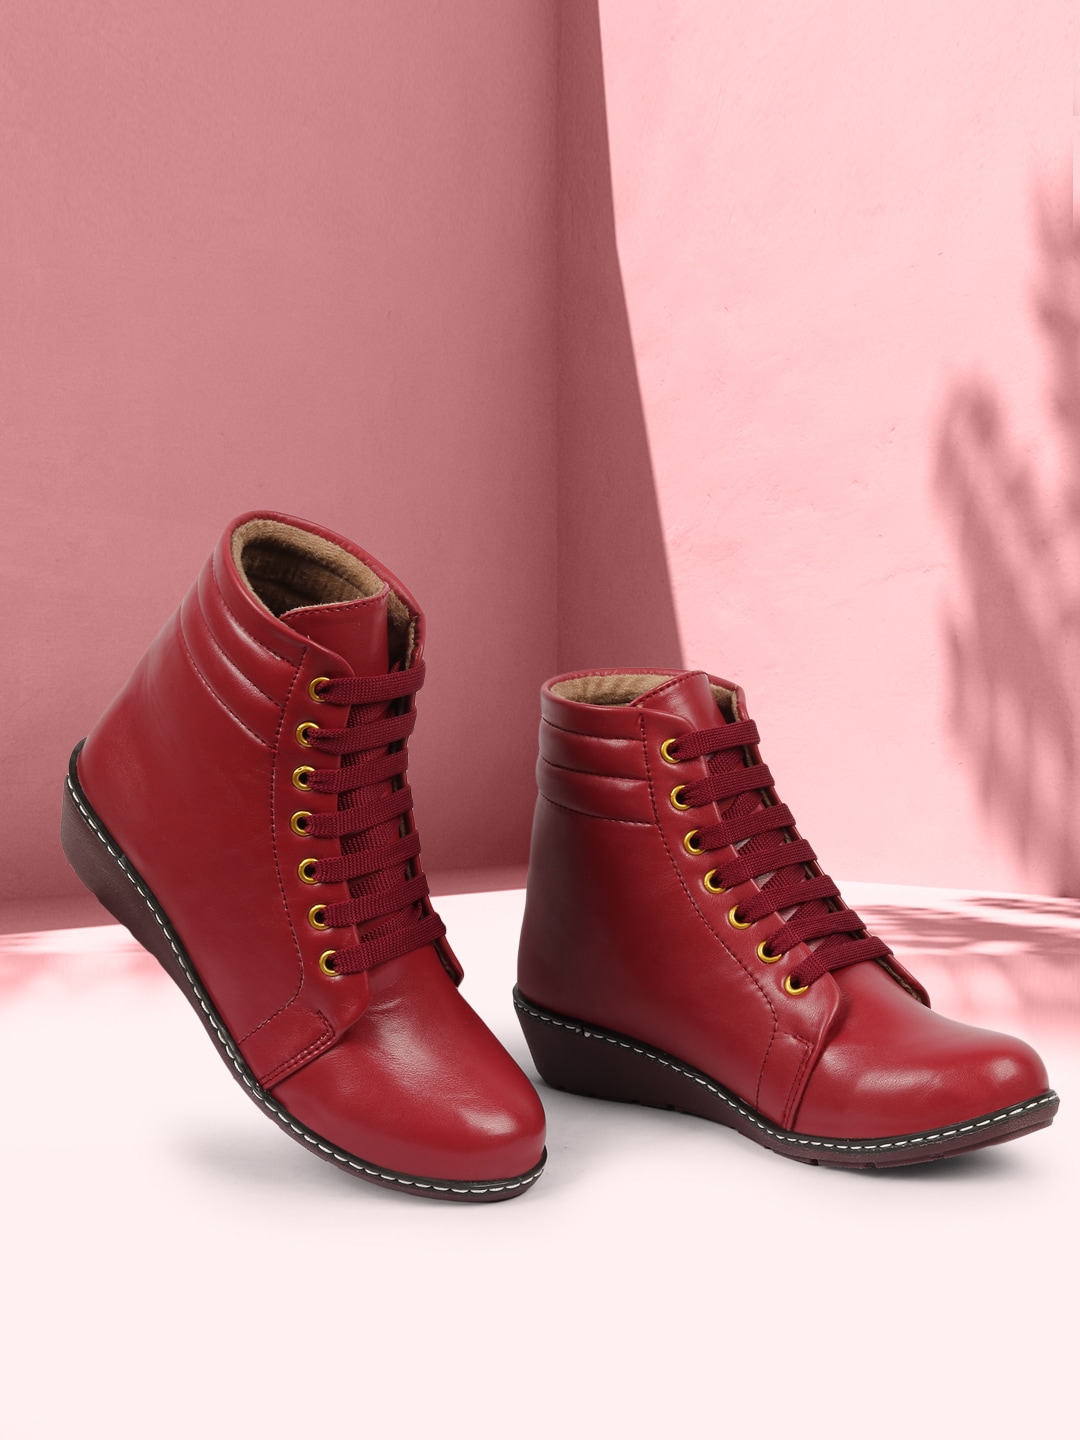 ZAPATOZ Women Red Wedge Heeled Boots Price in India